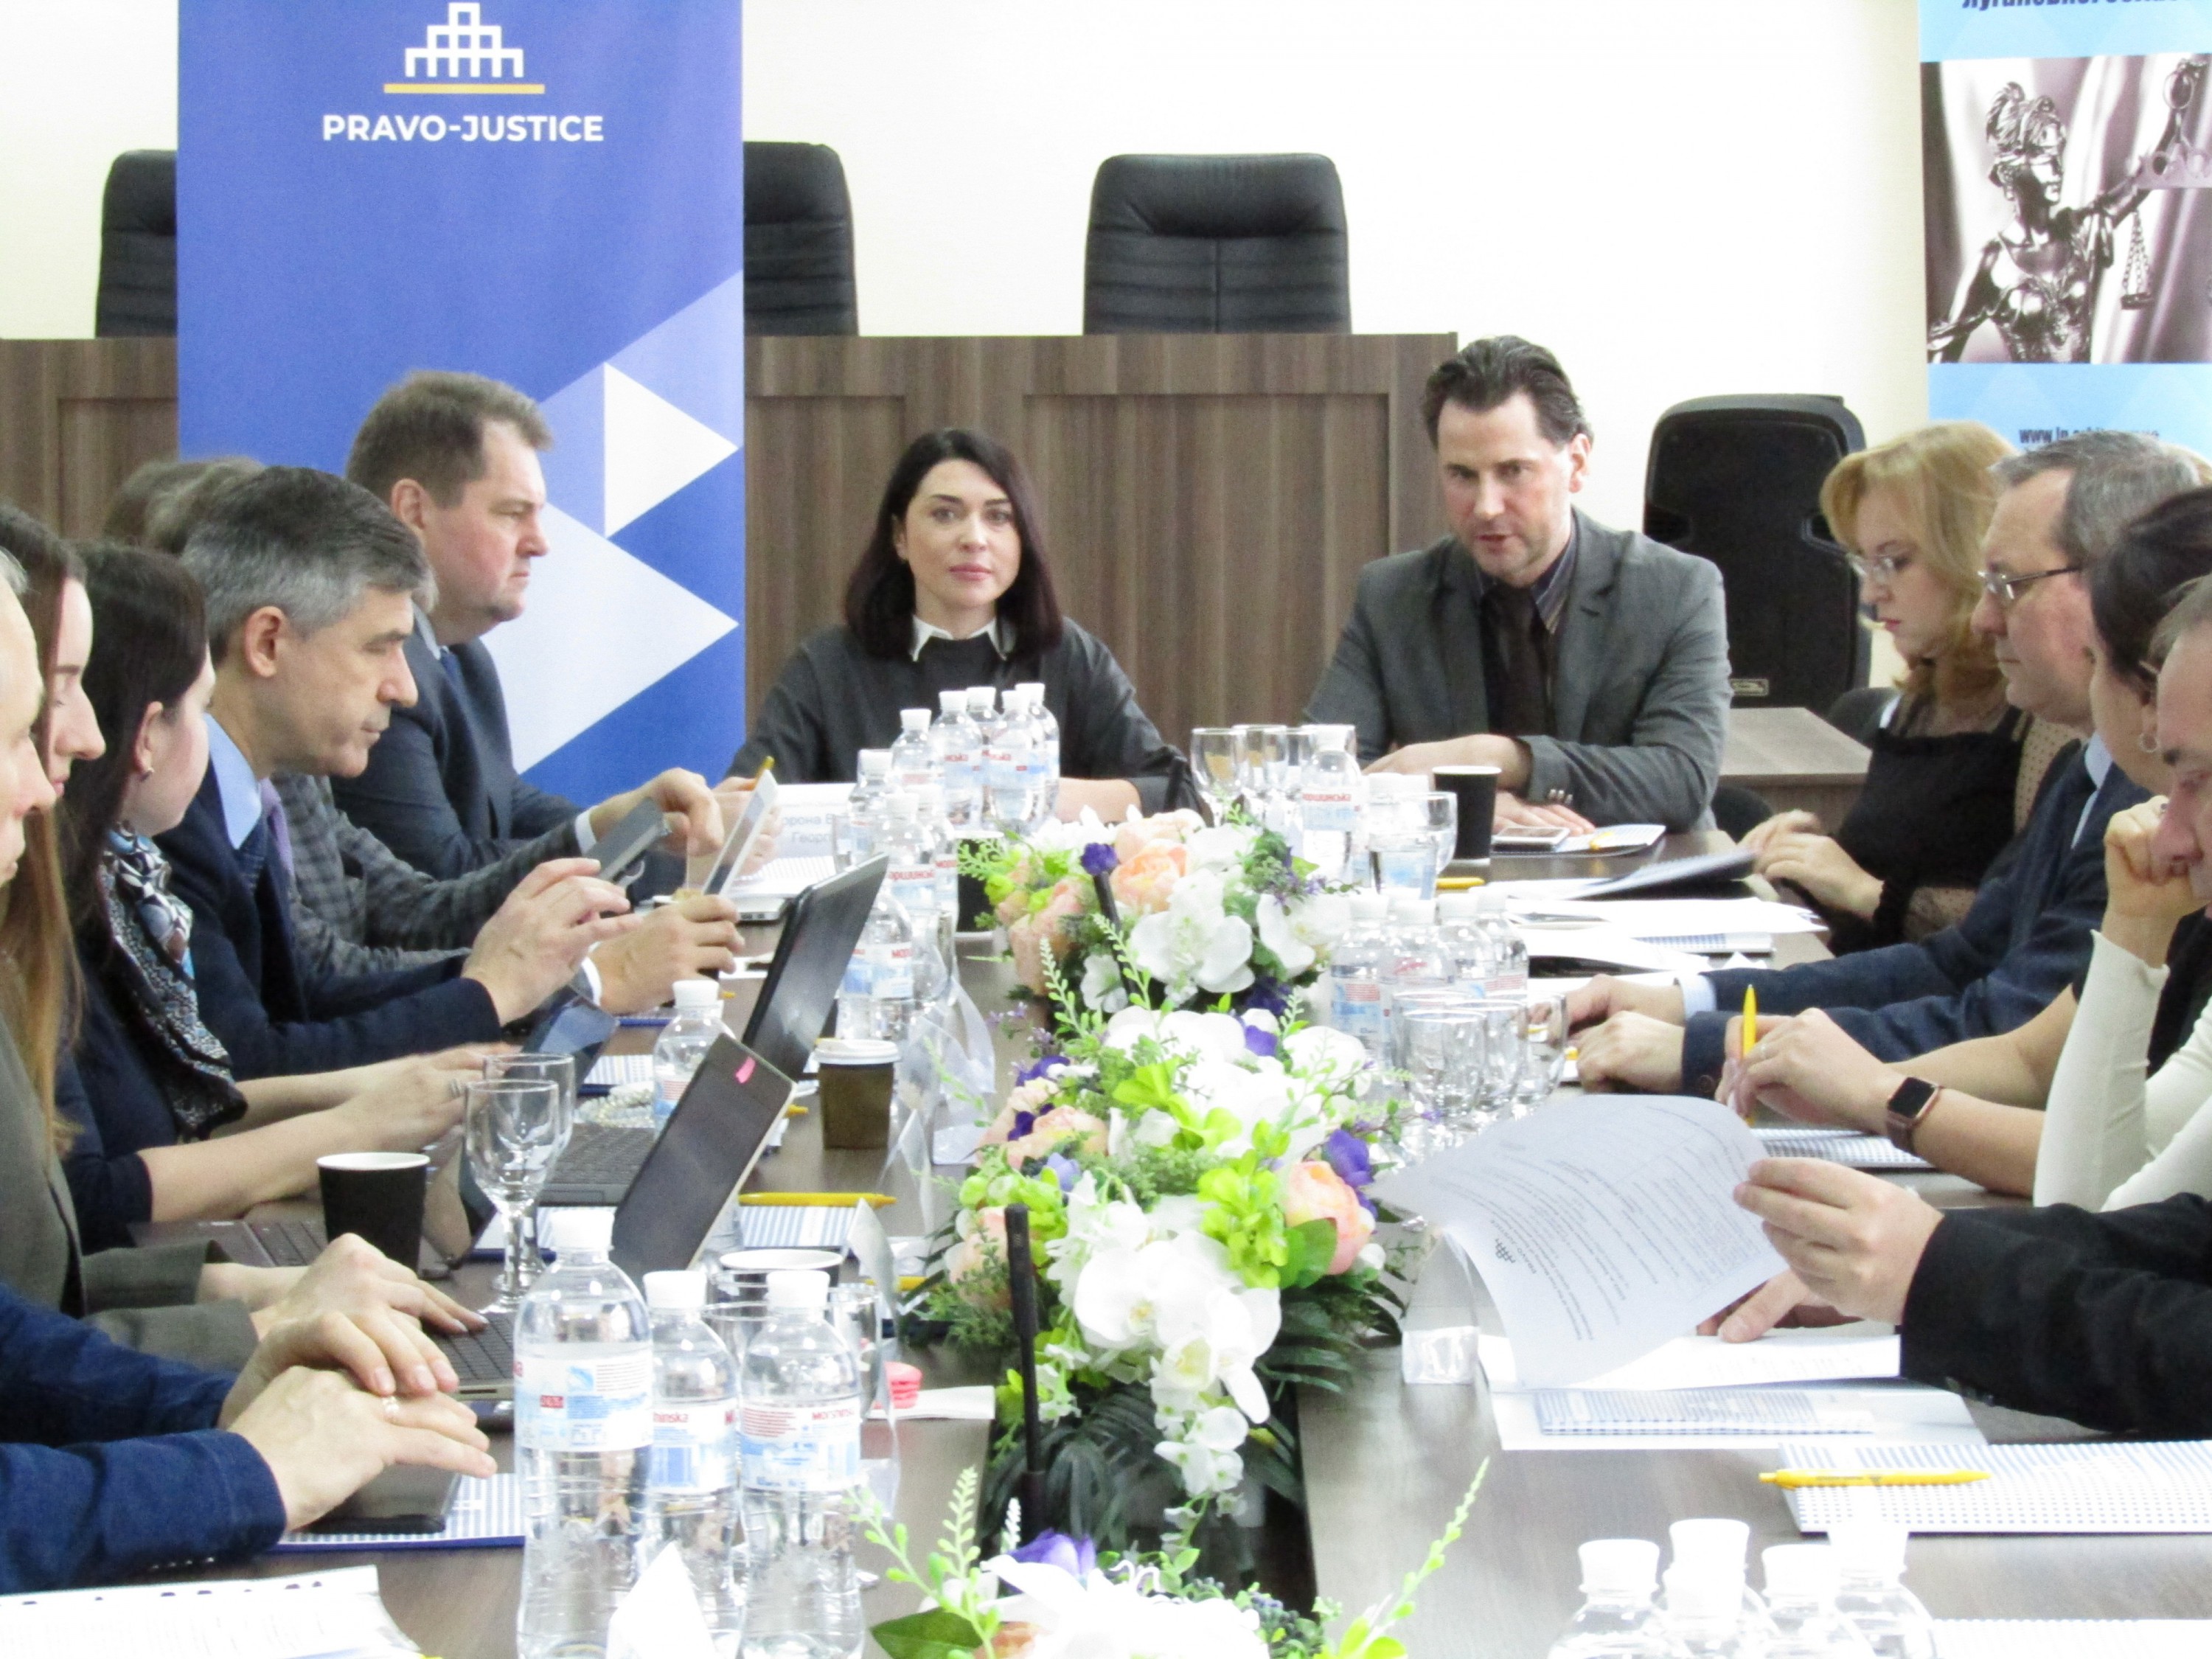 EU Project "Pravo-Justice" organised a first meeting of the Donbas Regional Judicial Reforms Council